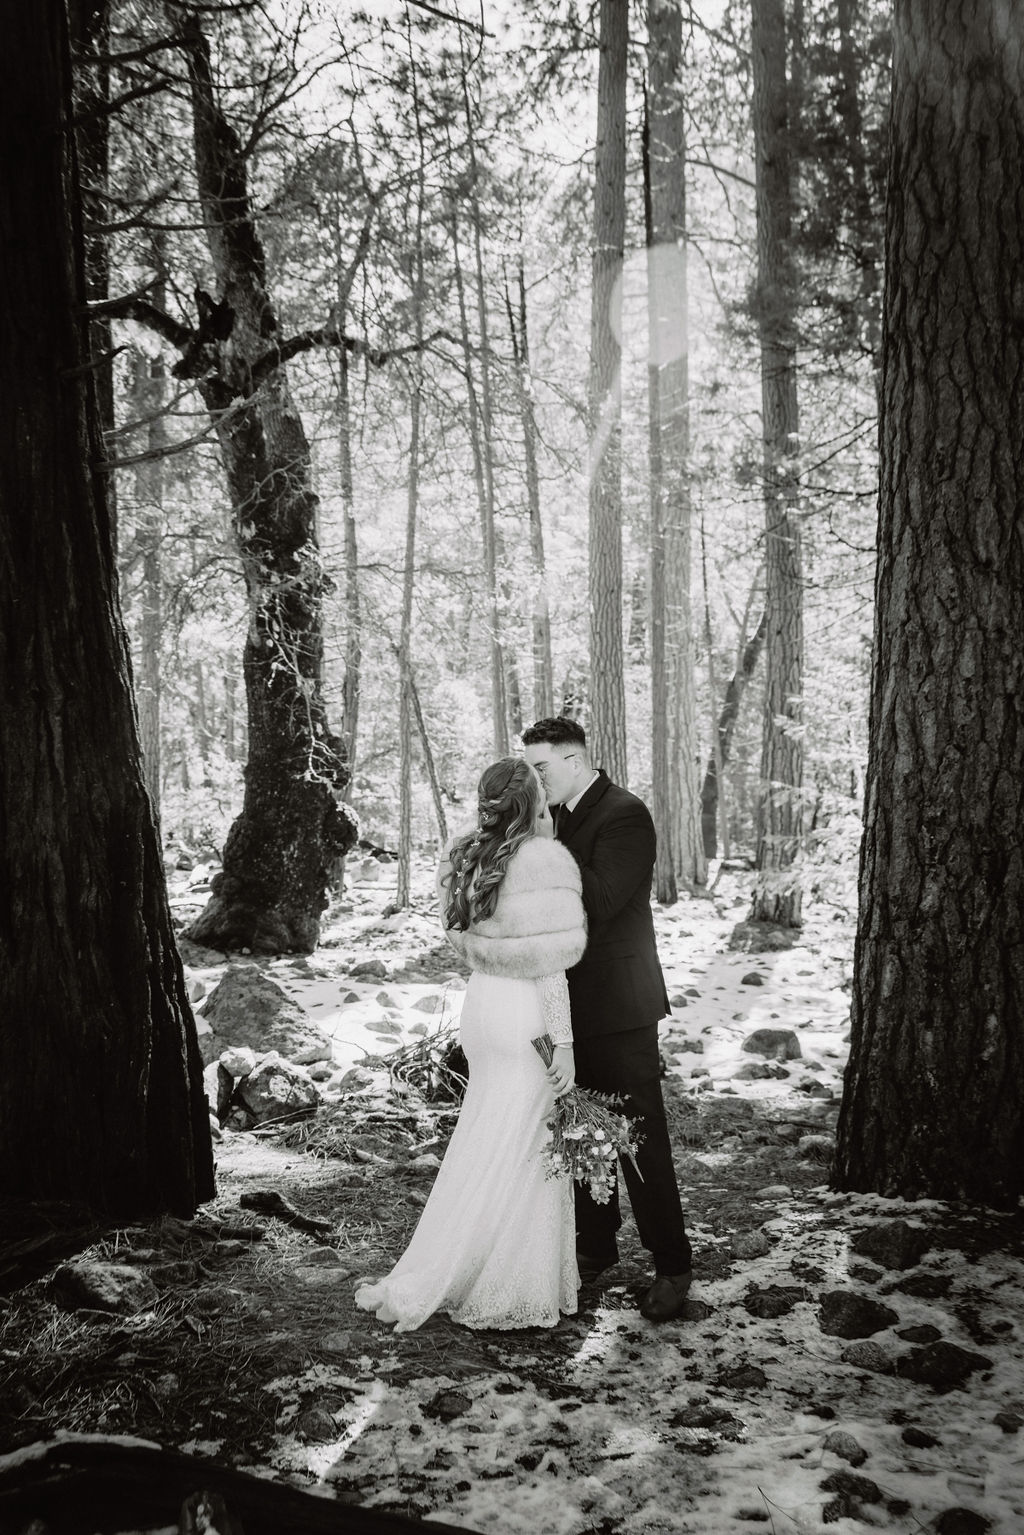 A couple embracing in a snowy forest setting at Yosemite National park.